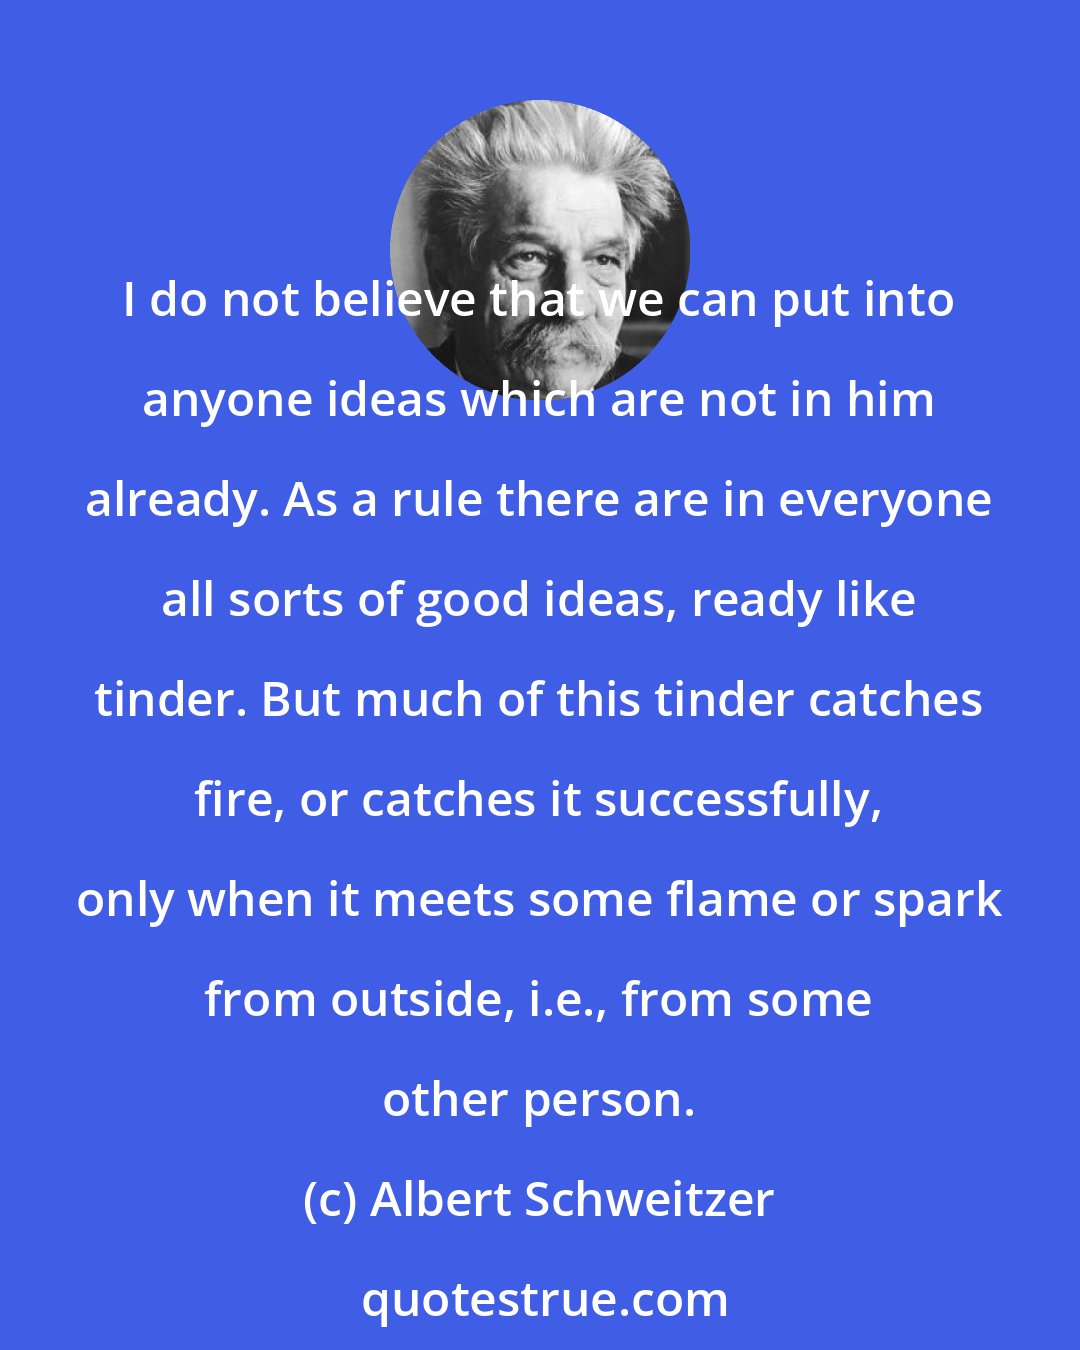 Albert Schweitzer: I do not believe that we can put into anyone ideas which are not in him already. As a rule there are in everyone all sorts of good ideas, ready like tinder. But much of this tinder catches fire, or catches it successfully, only when it meets some flame or spark from outside, i.e., from some other person.